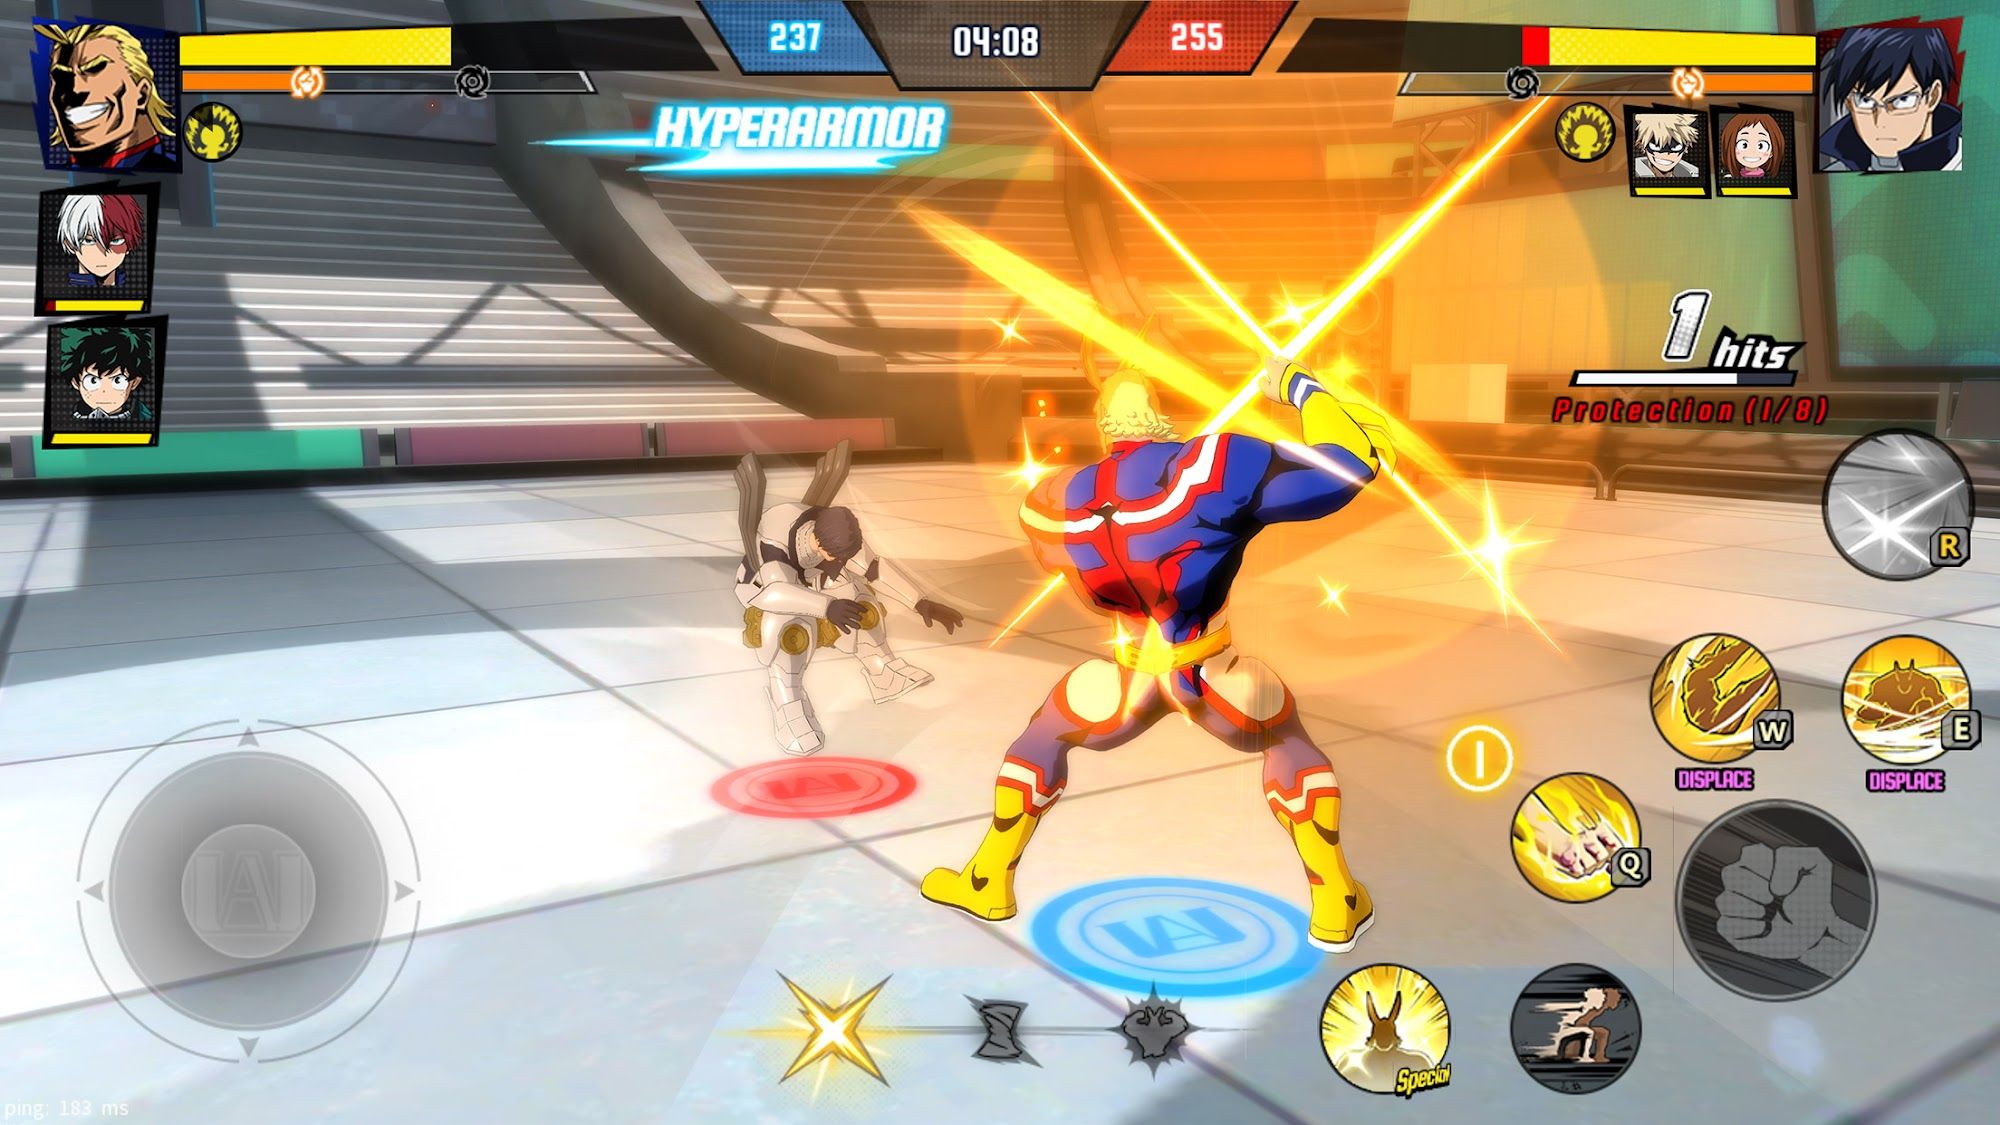 Gameplay of the My hero academia for Android phone or tablet.